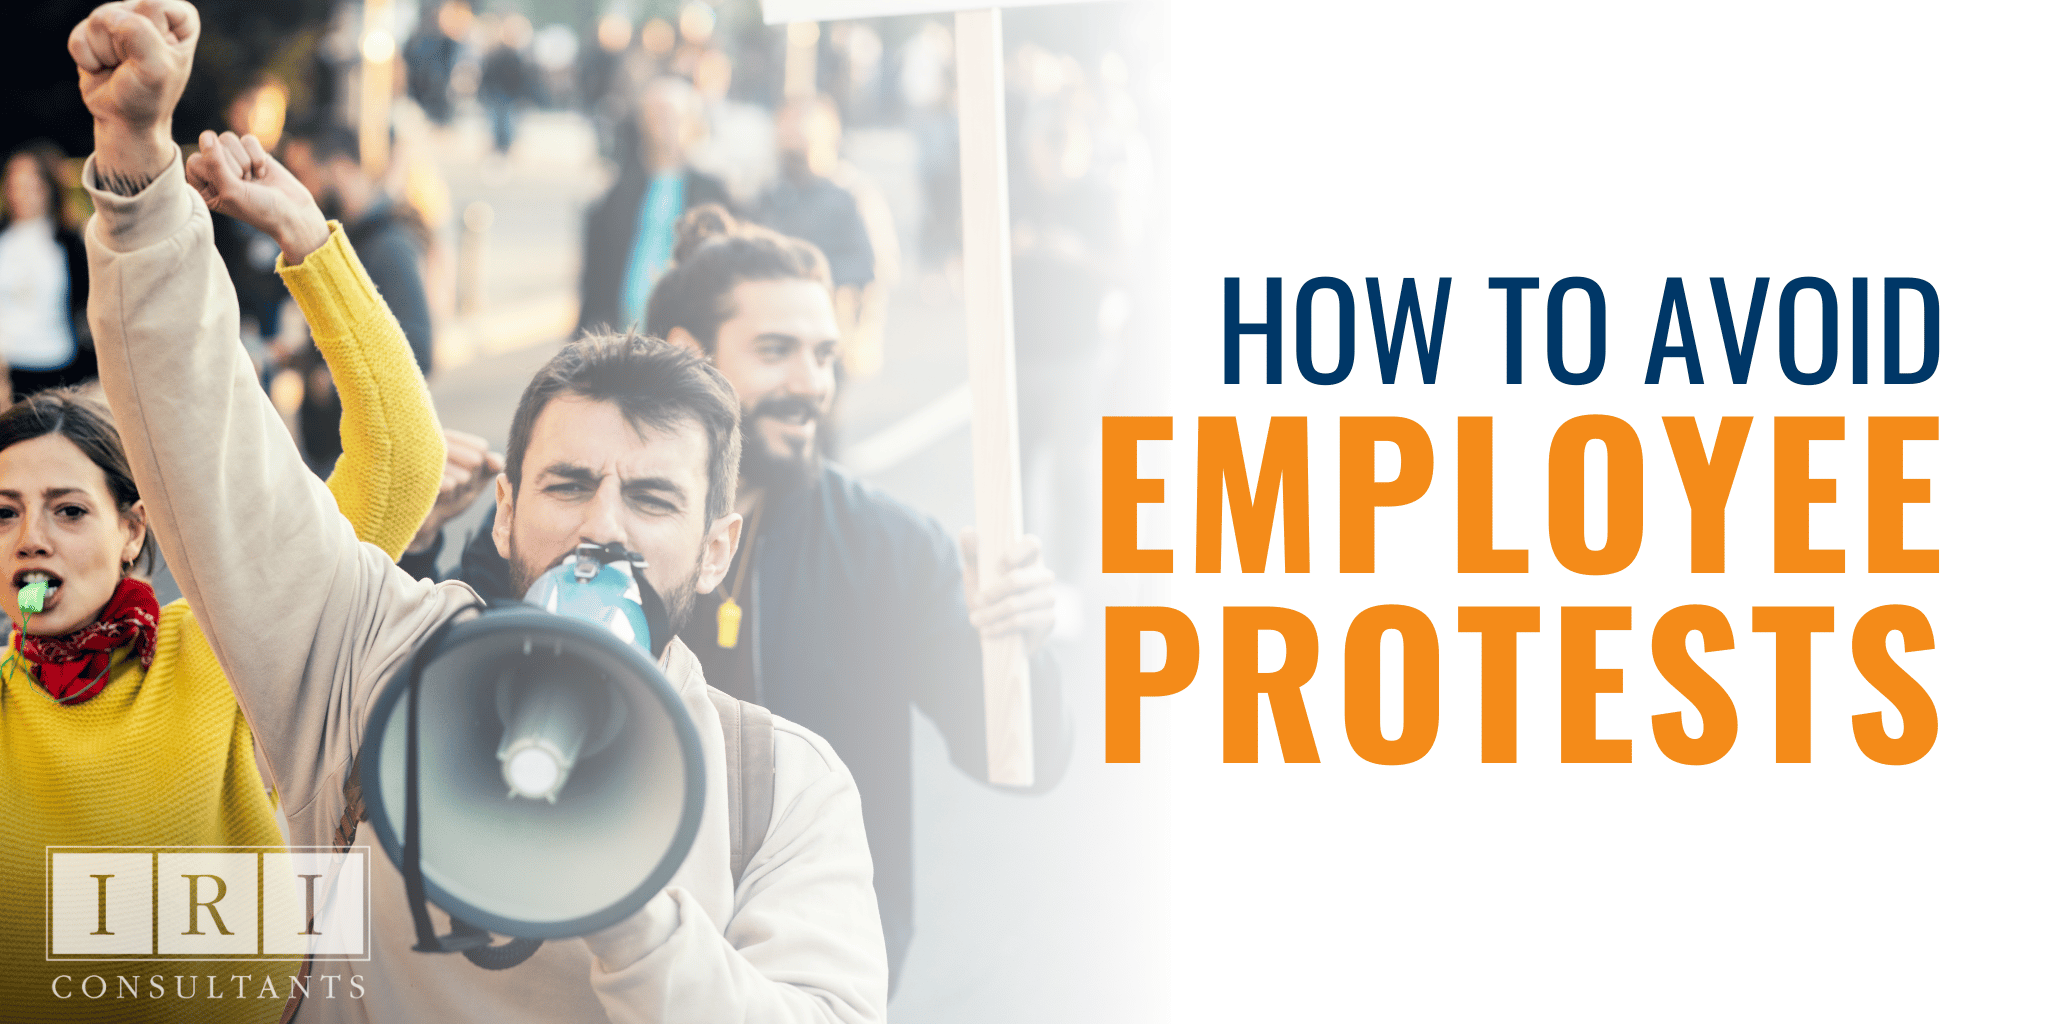 How To Avoid Employee Protests